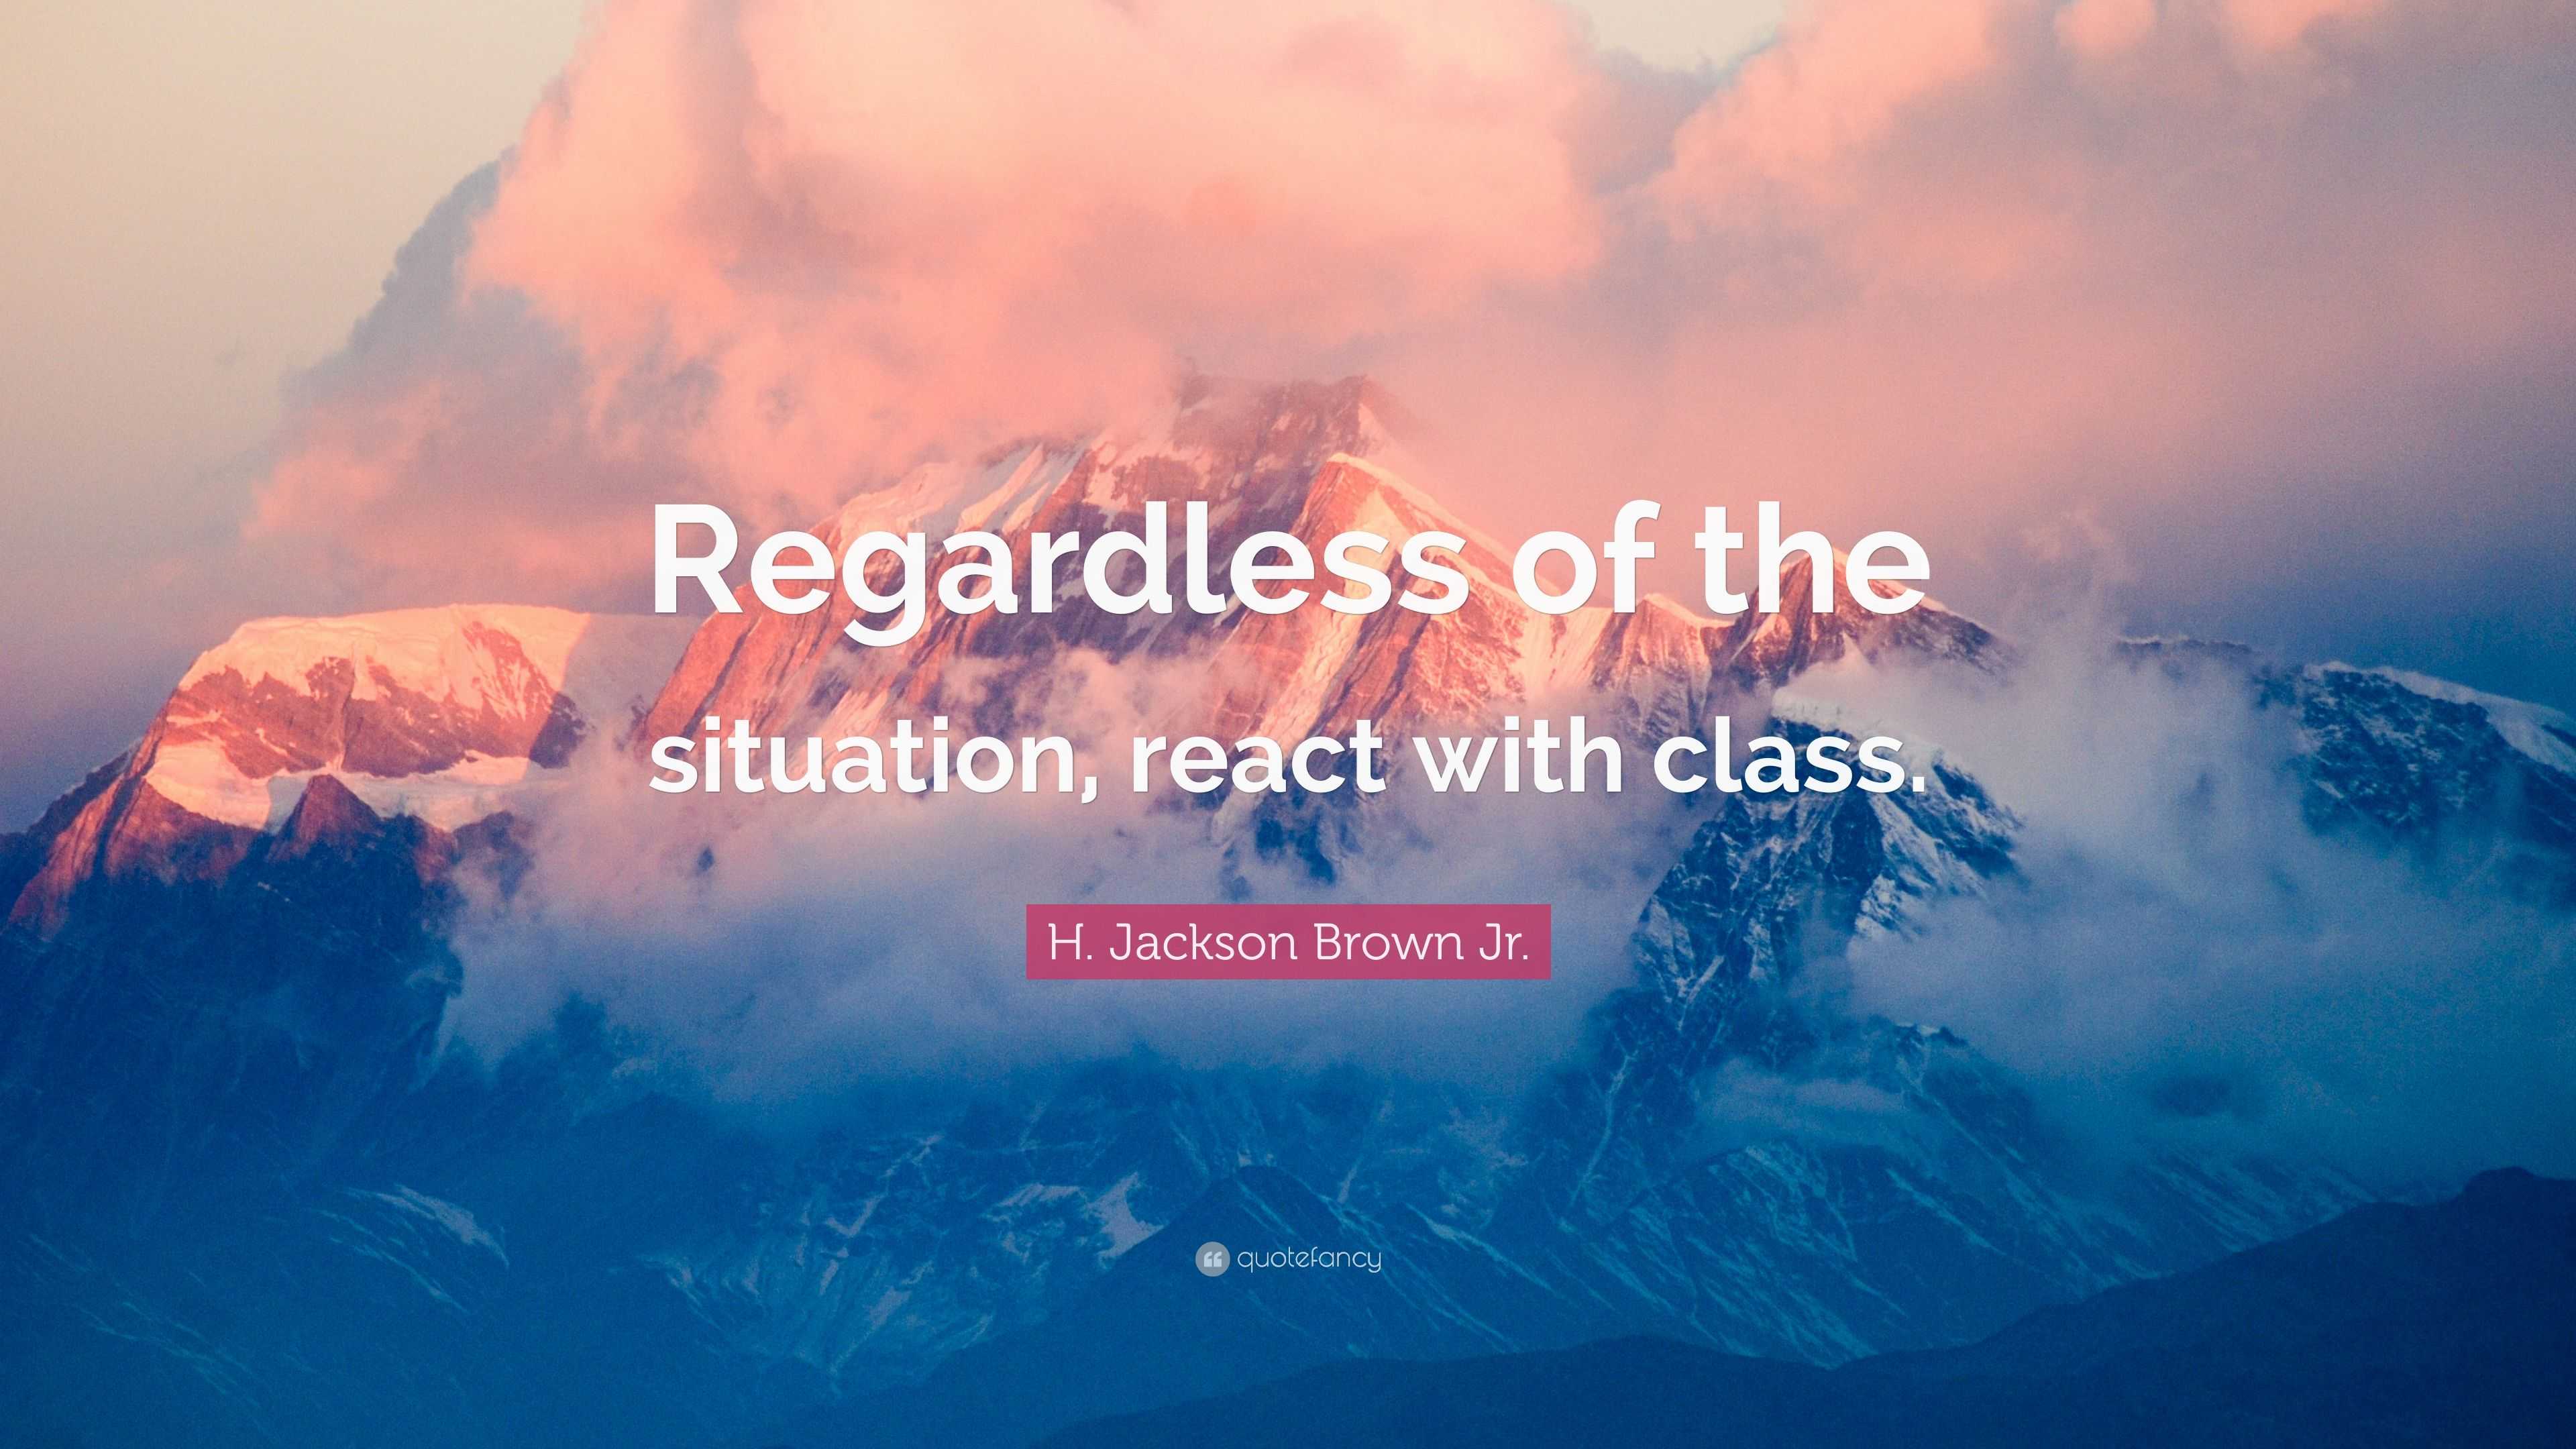 H. Jackson Brown Jr. Quote “Regardless of the situation, react with